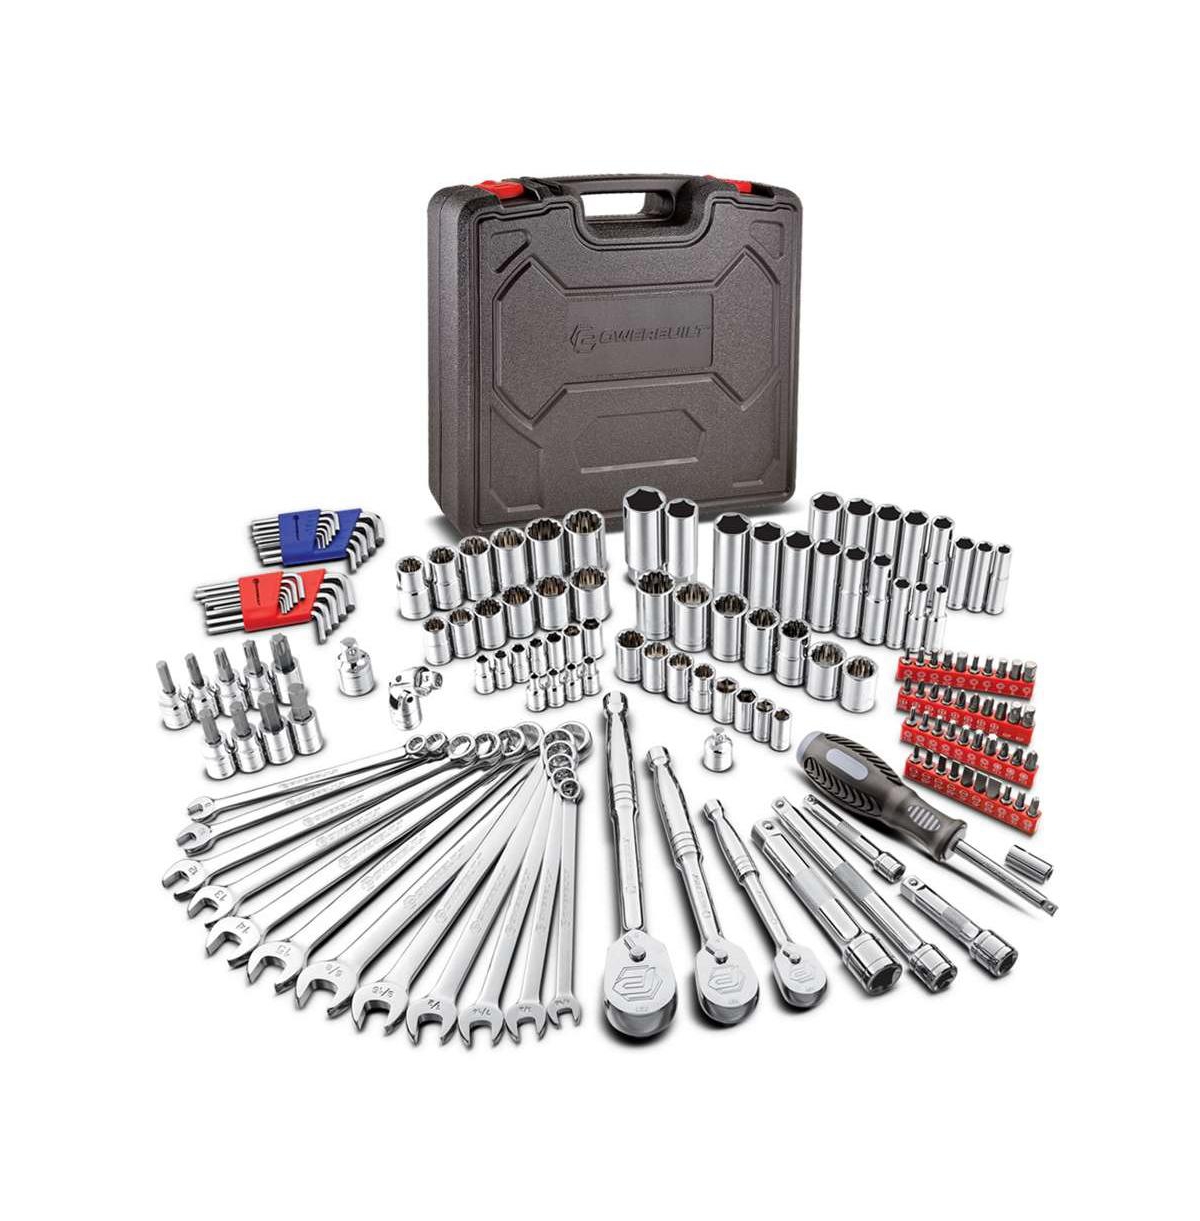 152 Piece Master Tool Set with Sockets, Ratchets, and Wrenches - Black